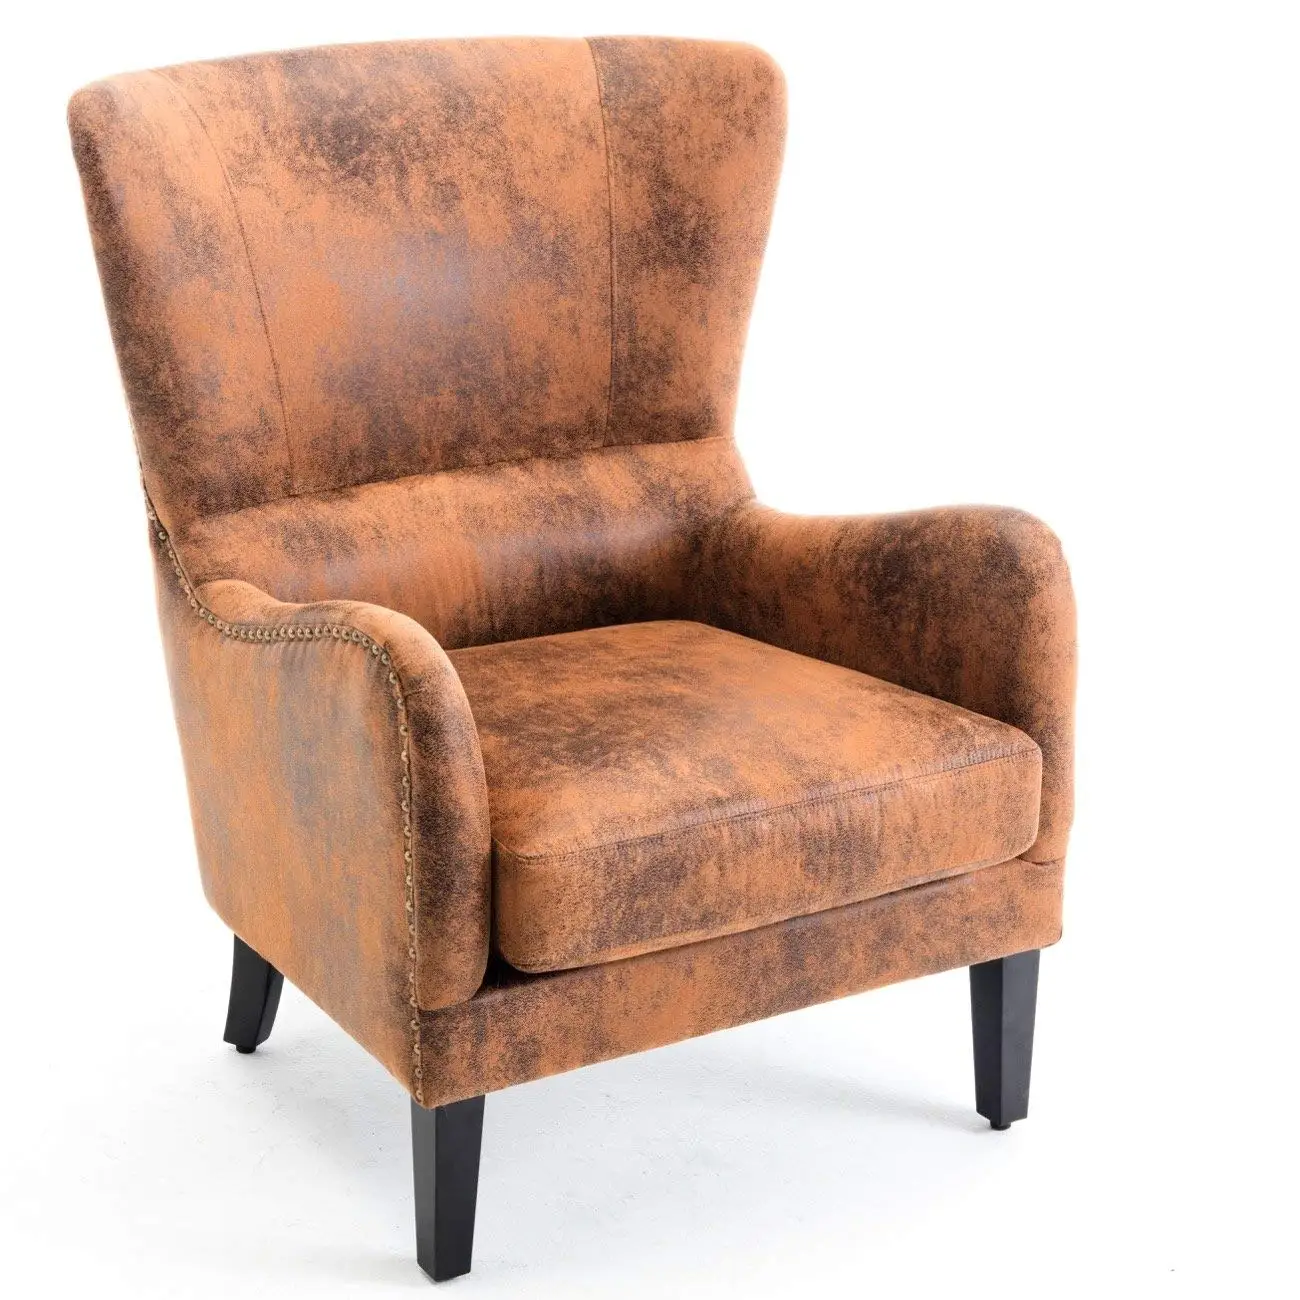 Cheap Leather Wingback Office Chair Find Leather Wingback Office Chair Deals On Line At Alibaba Com